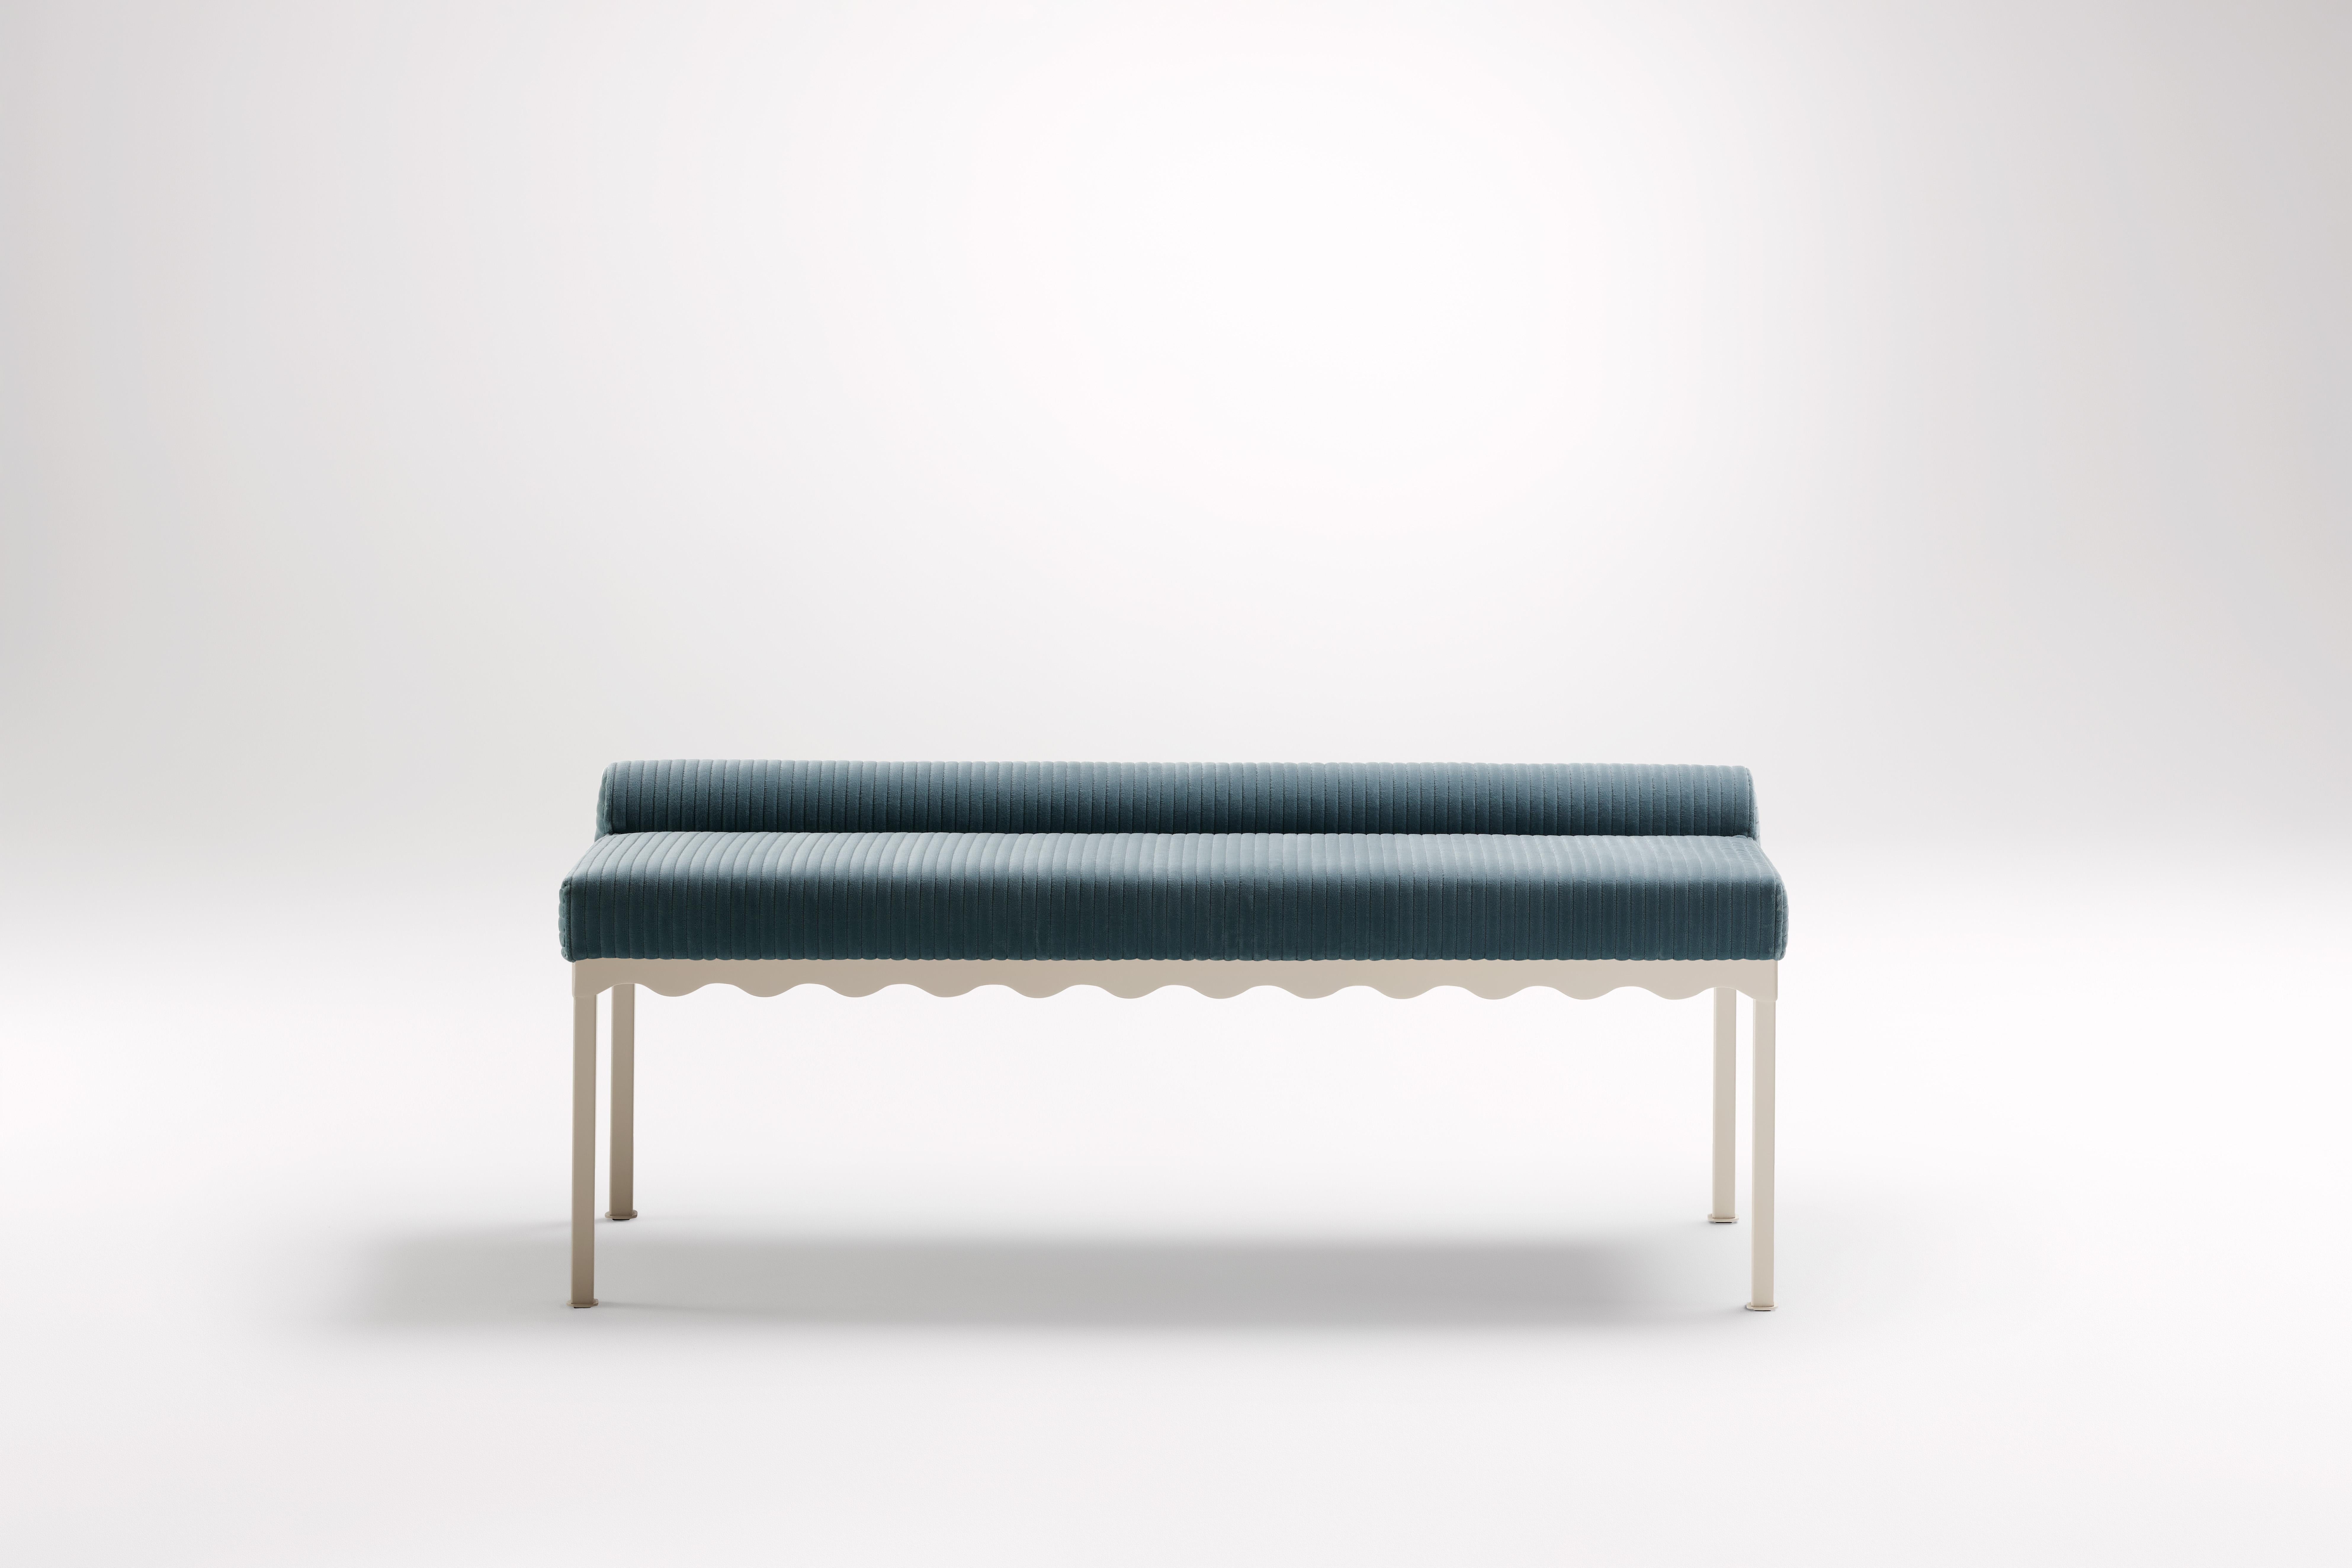 Oracle Bellini 1340 Bench by Coco Flip
Dimensions: D 134 x W 54 x H 52.5 cm
Materials: Timber / Upholstered tops, Powder-coated steel frame. 
Weight: 20 kg
Frame Finishes: Textura Paperbark.

Coco Flip is a Melbourne based furniture and lighting